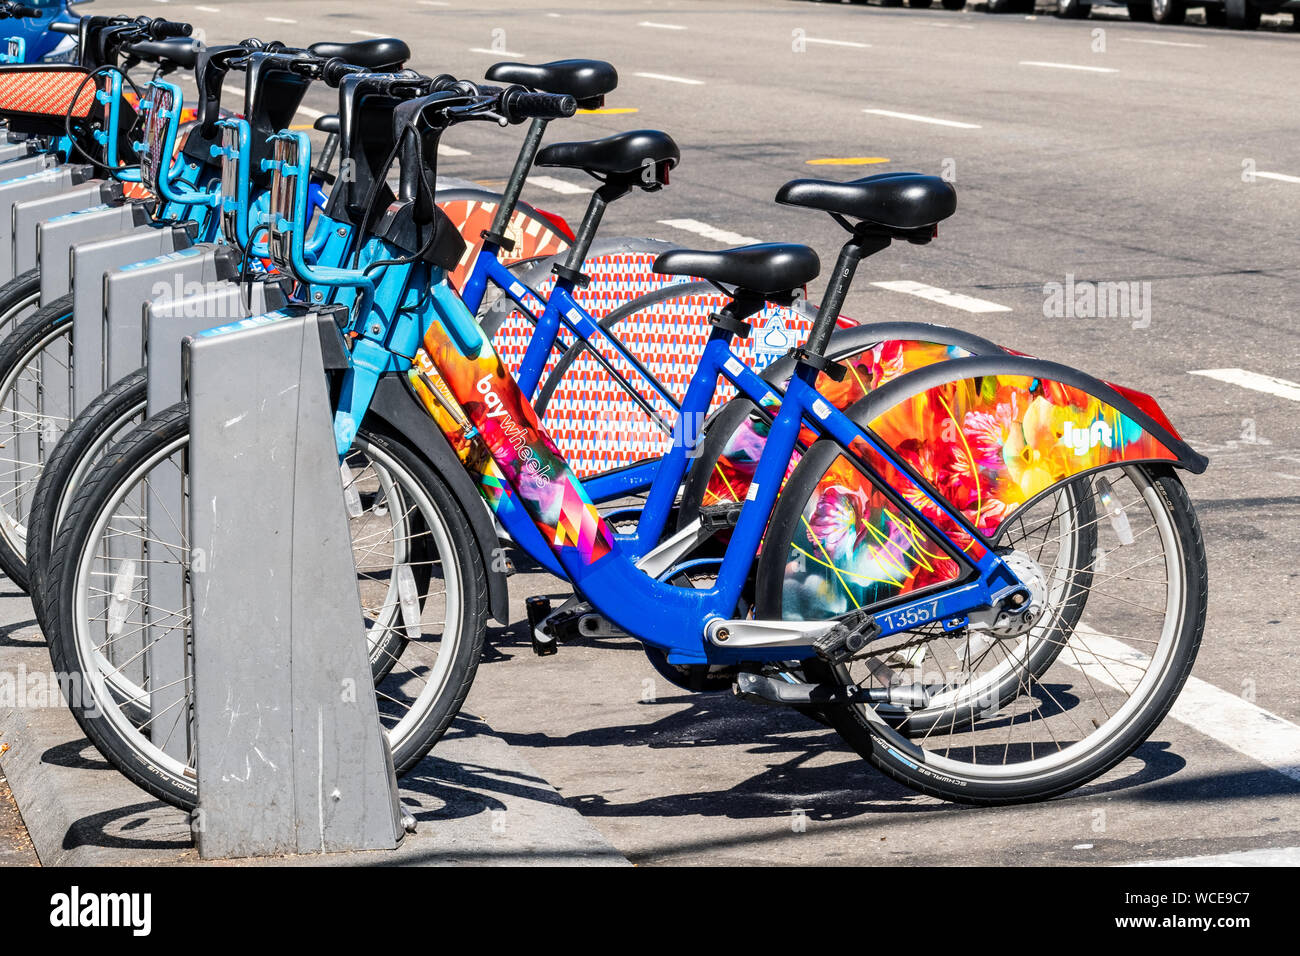 Aug 21, 2019 San Francisco / CA / USA - Colorful Bay Wheels (formerly Ford GoBike) bicycles parked at a station; Motivate (the Company operating the b Stock Photo